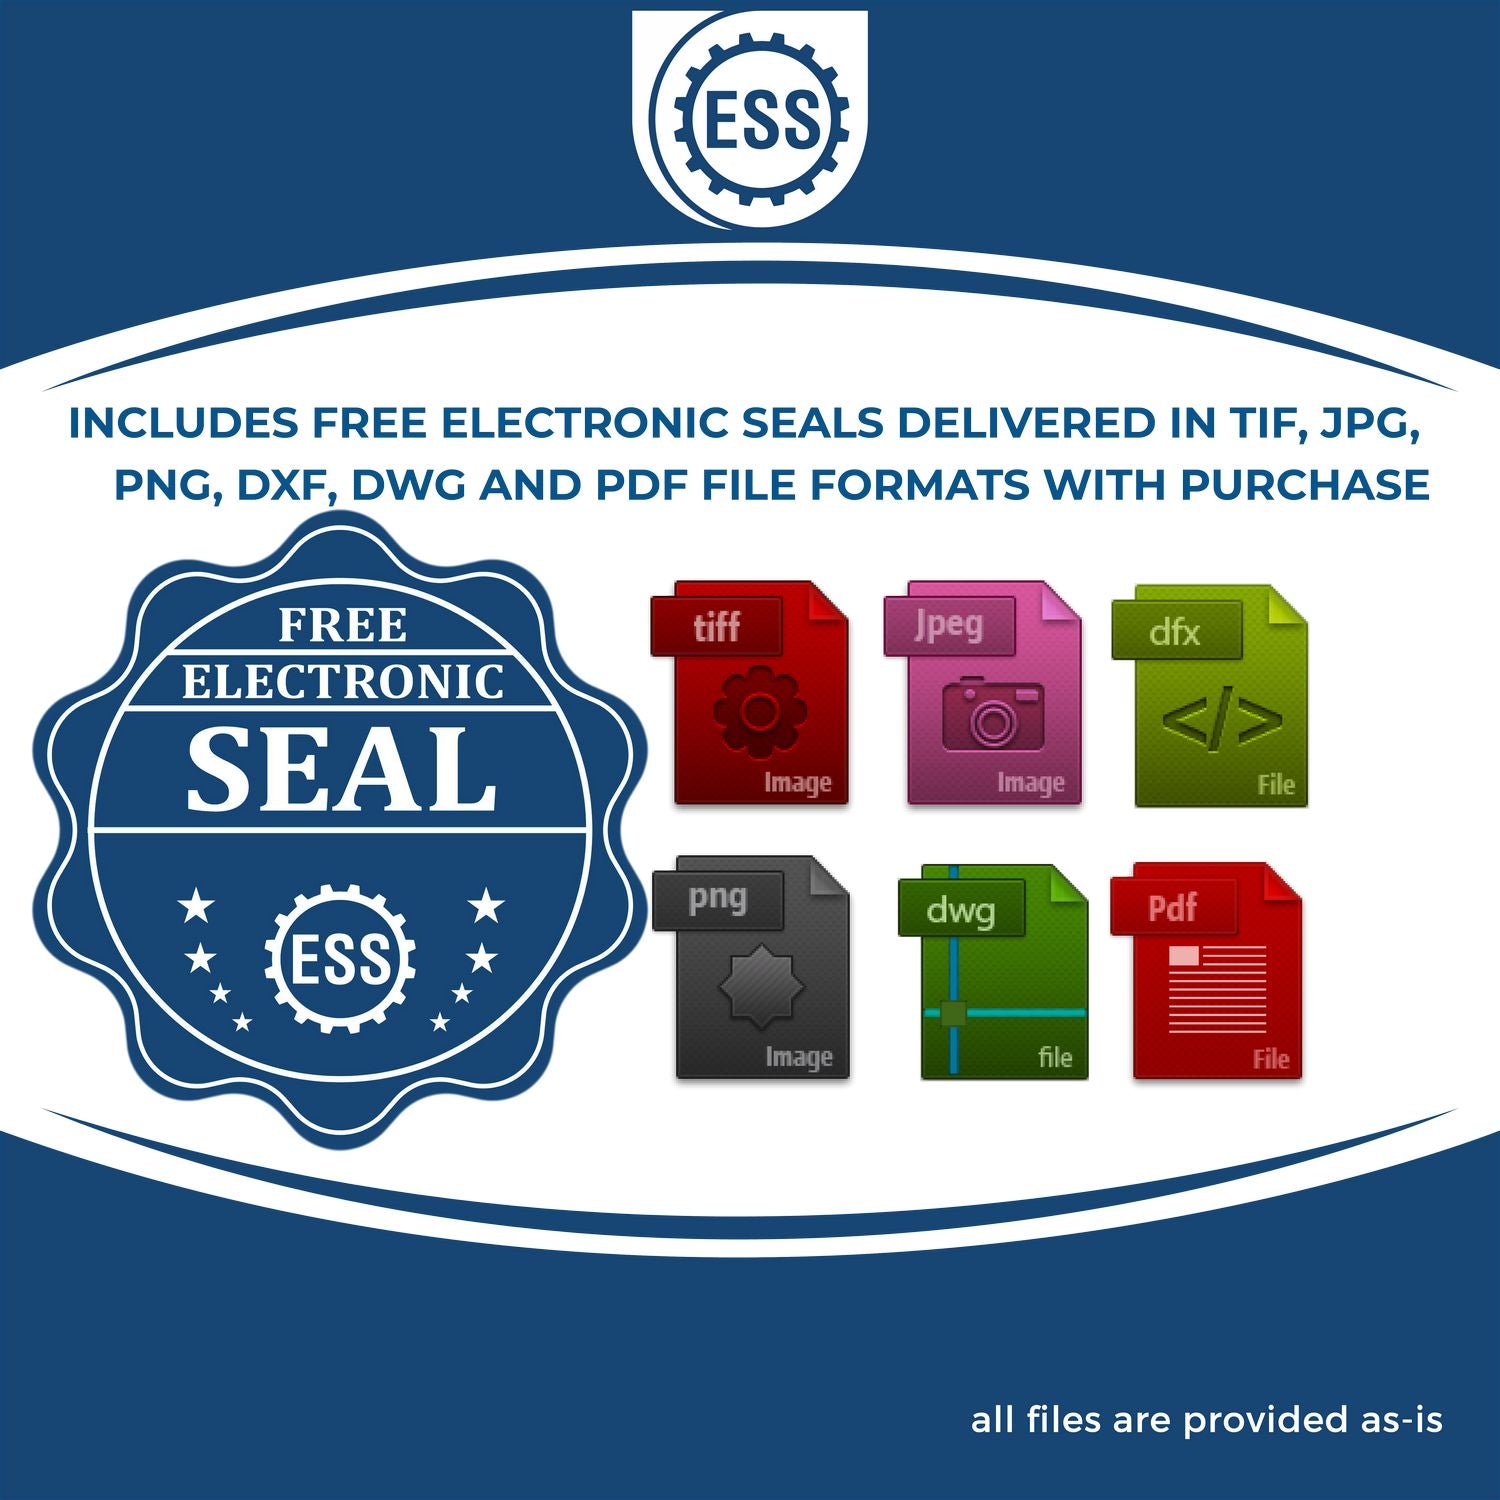 An infographic for the free electronic seal for the State of Colorado Extended Long Reach Engineer Seal illustrating the different file type icons such as DXF, DWG, TIF, JPG and PNG.